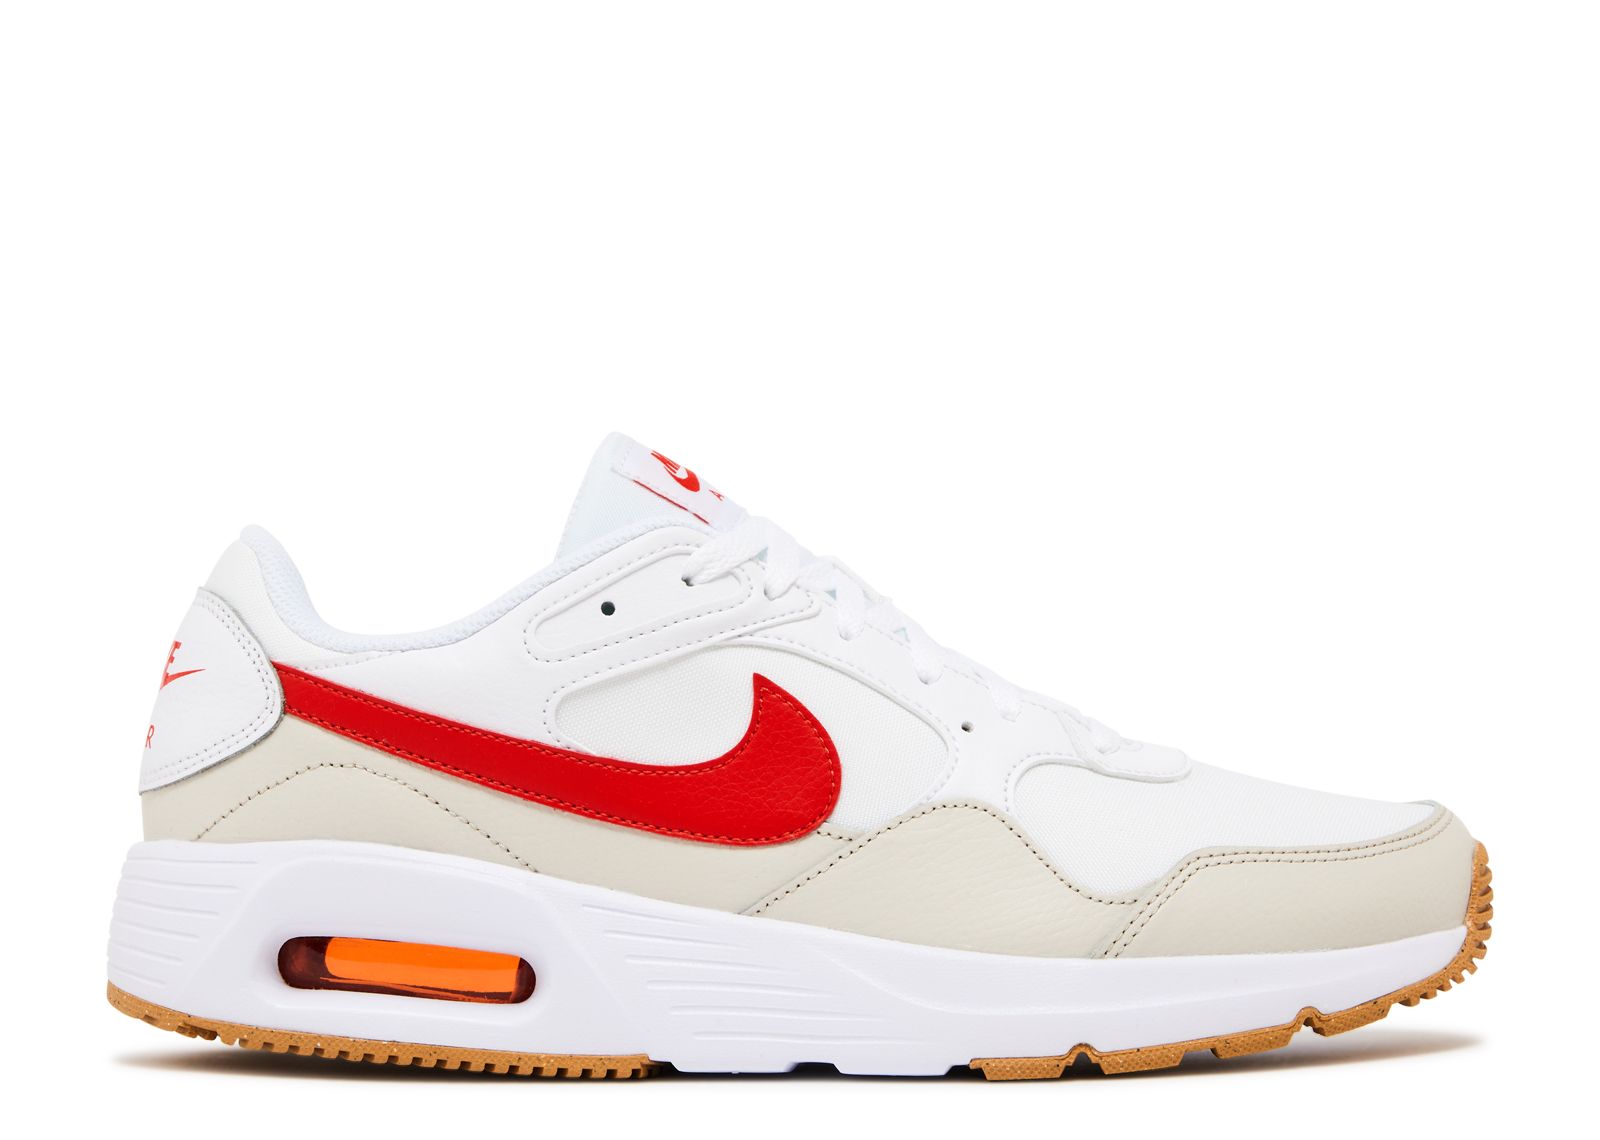 SC brown/picante Max Red\' brown/gum Picante orewood 112 Club - white/light \'White Flight - CW4555 | Air light Nike - red